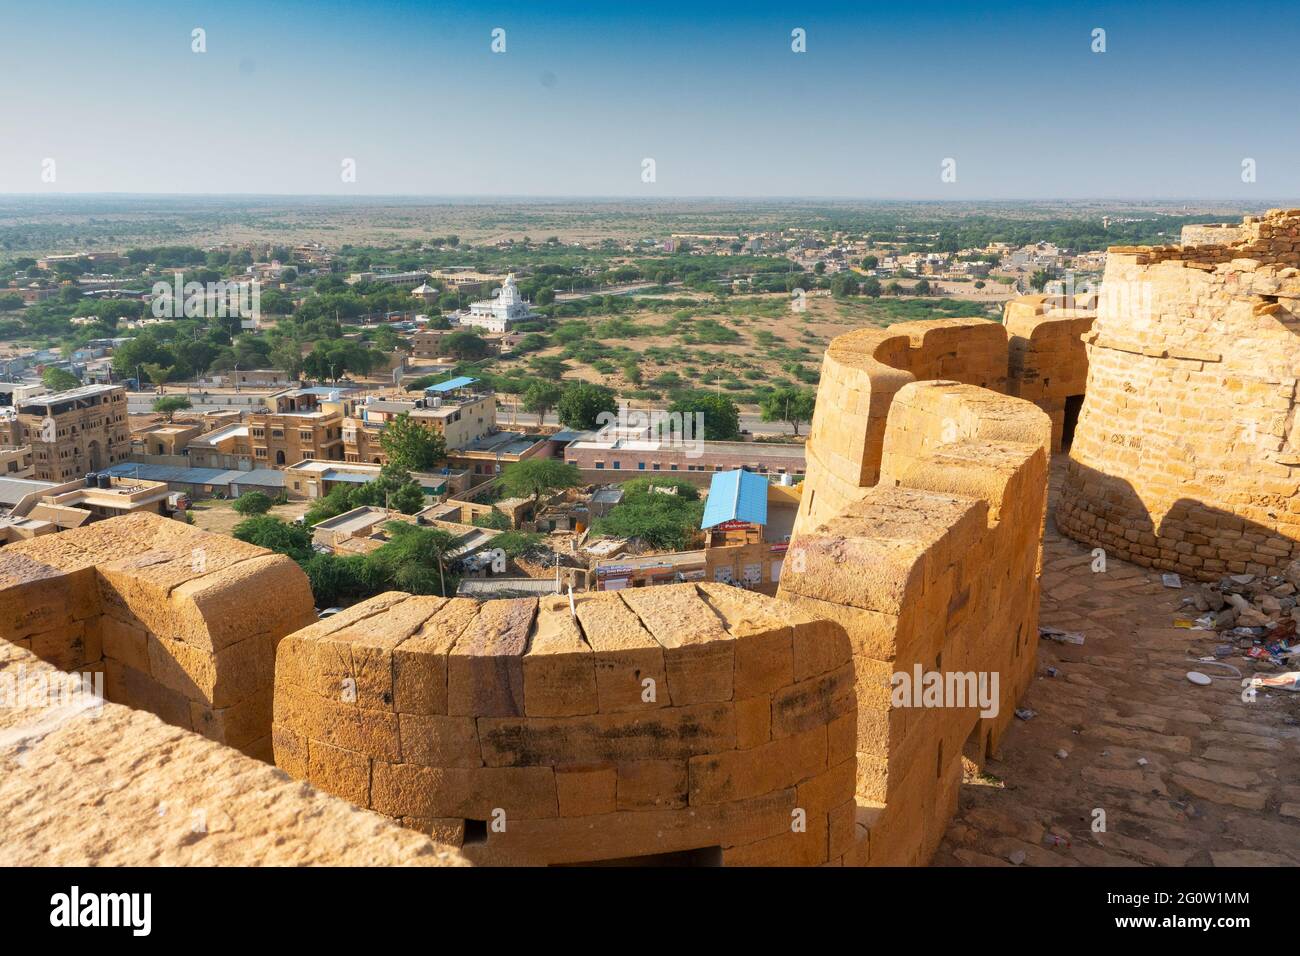 Jaisalmer, Rajasthan, India - October 13,2019 : Great walls of Jaisalmer Fort or Golden Fort, made of yellow sandstone, in the morning light. Stock Photo